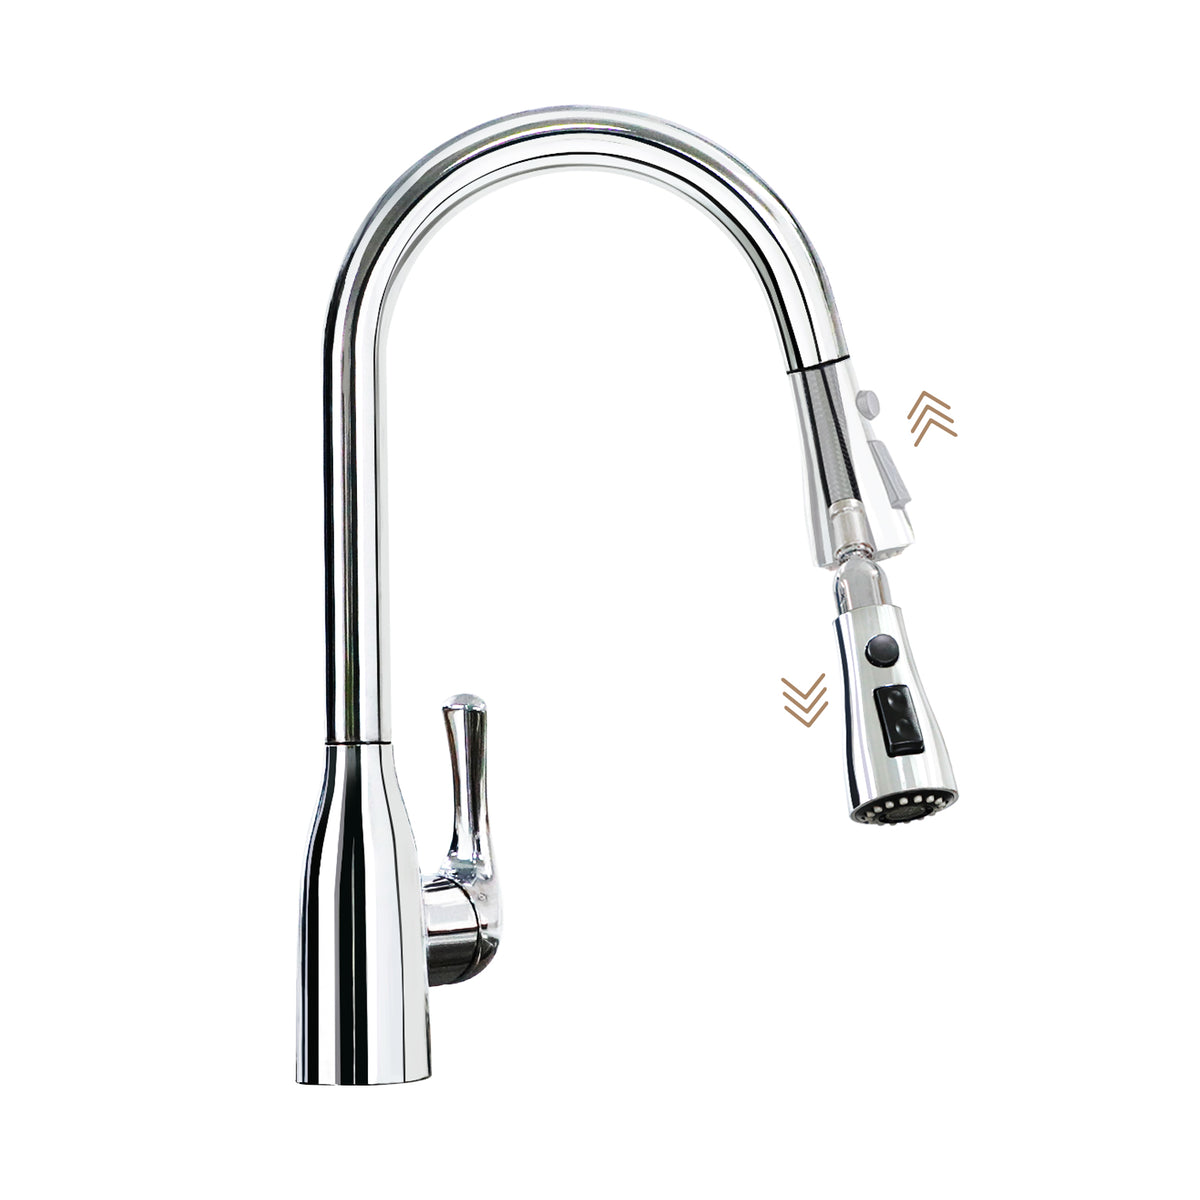 R&T Chrome Kitchen Faucet with PullDown Sprayer